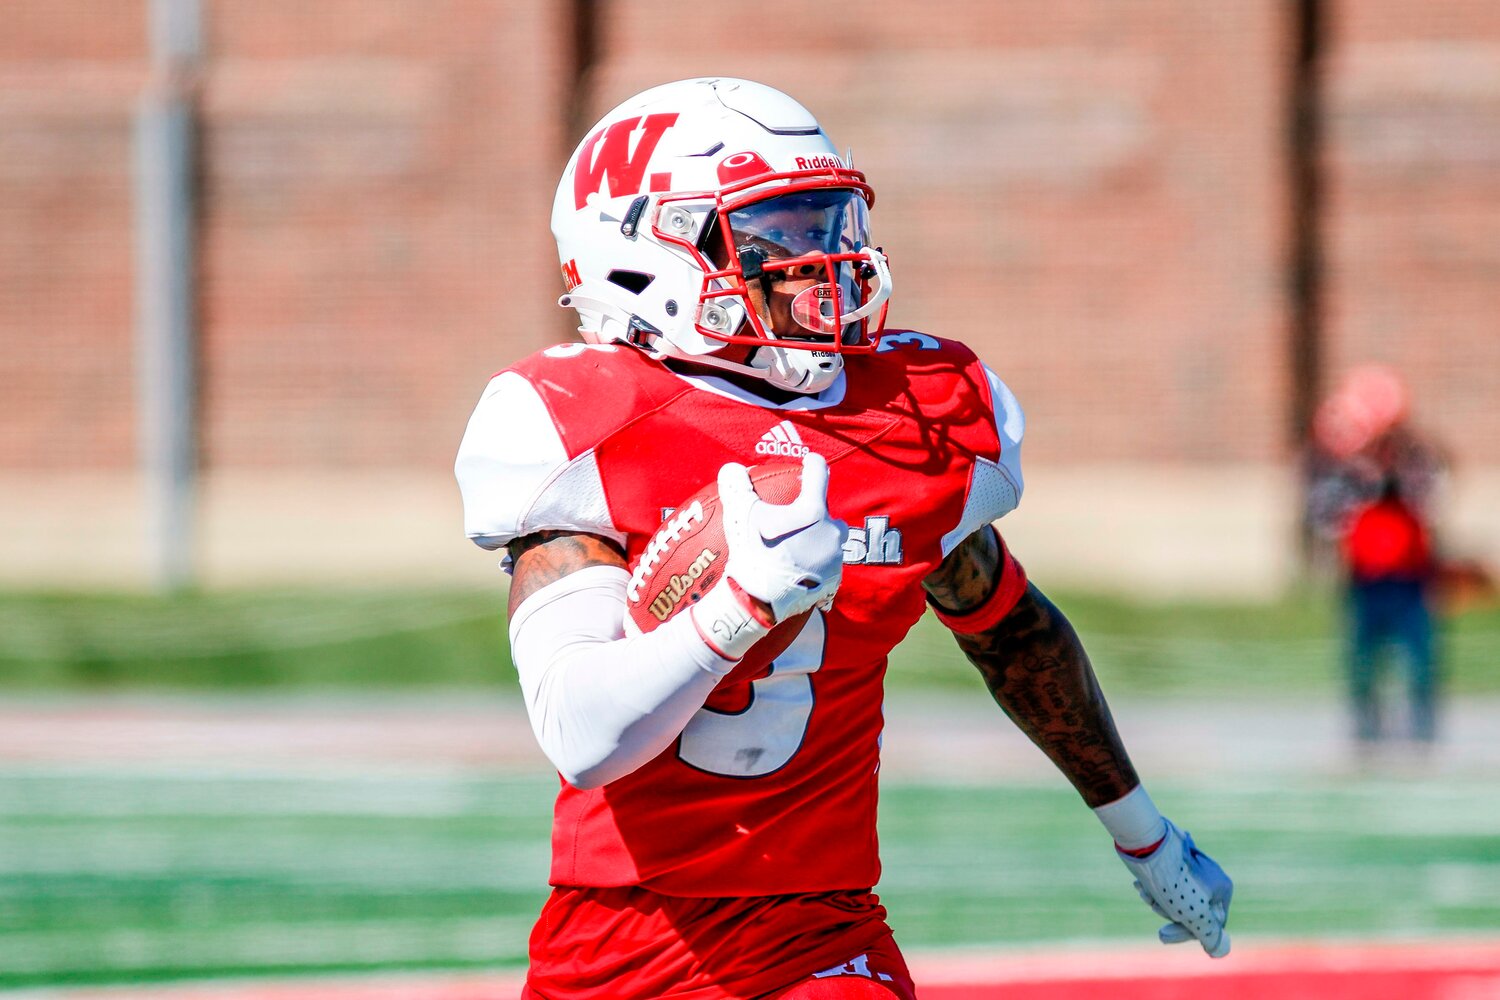 Derek Allen Jr. hauled in 11 catches for 185 yards and a pair of TD's in the 45-35 Wabash win.